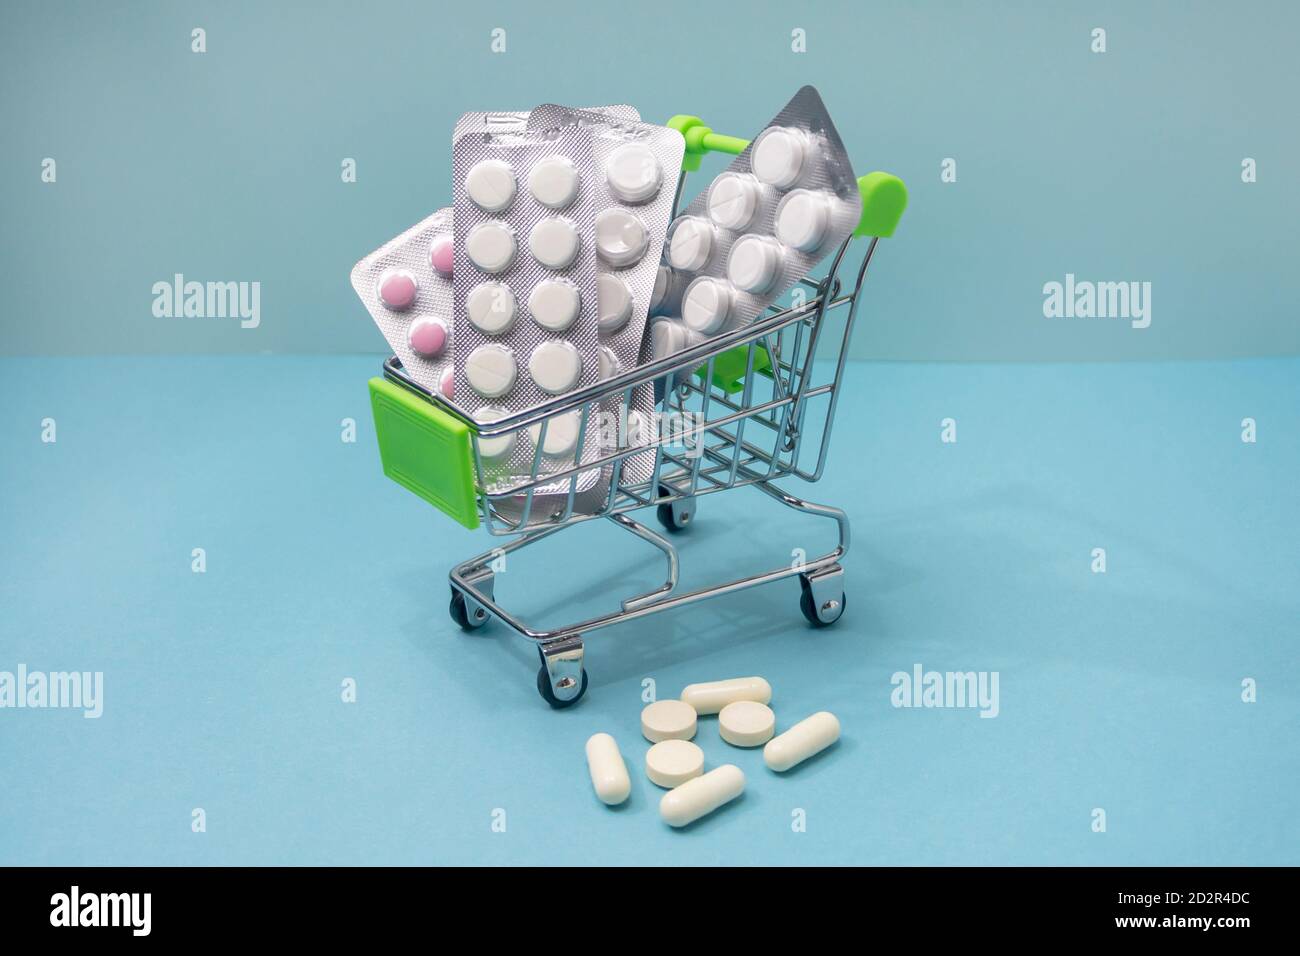 Buying medicines online. Home delivery. Medicines in shopping cart on blue background close-up. Stock Photo